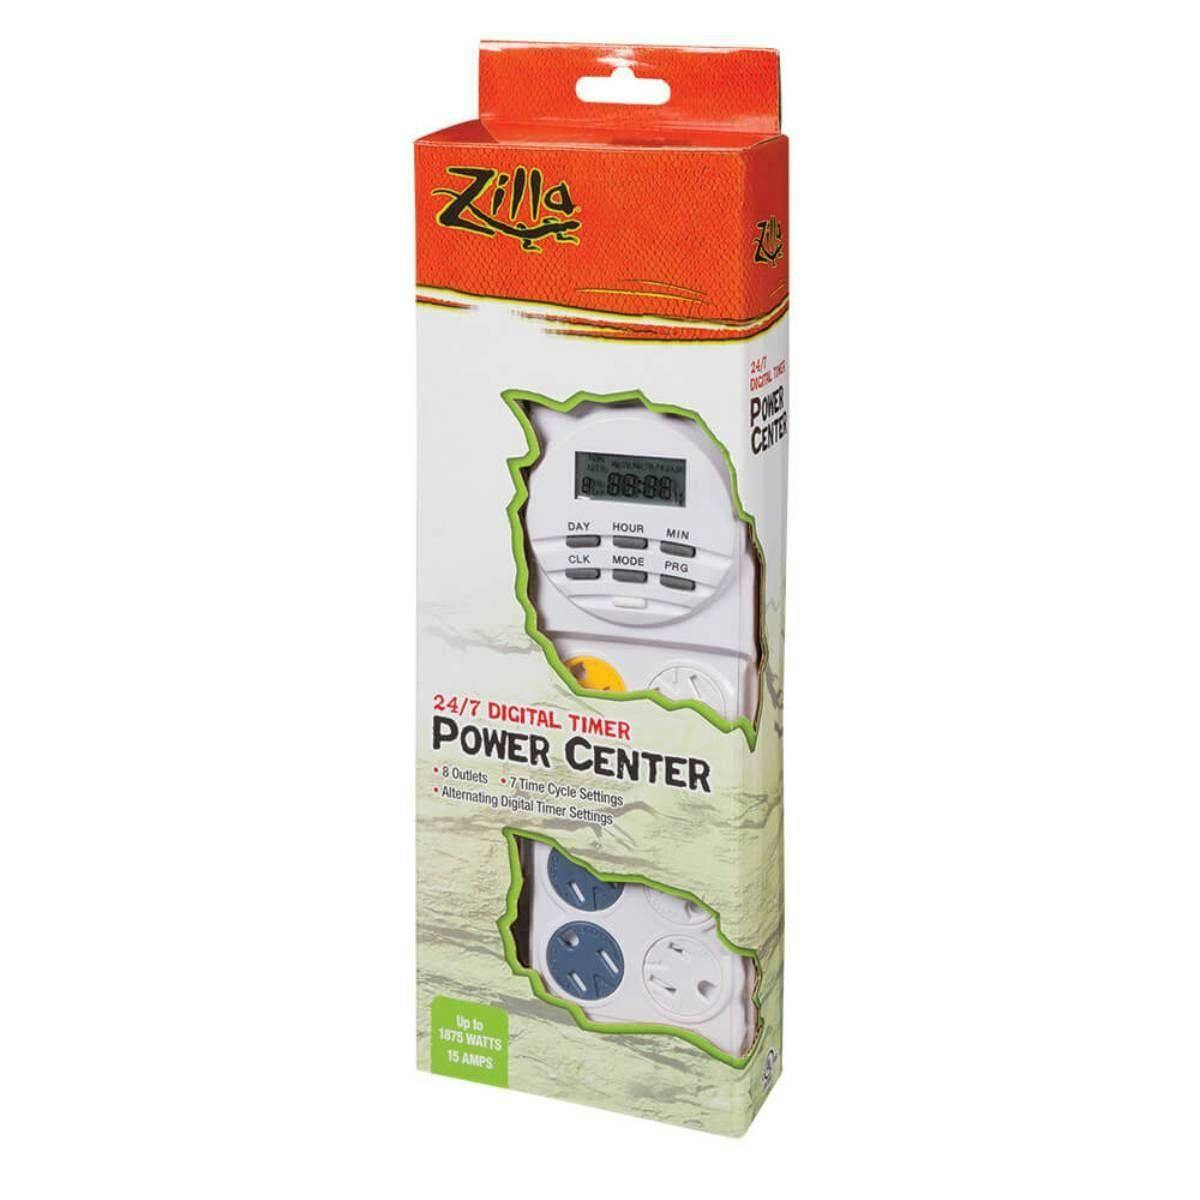 Image for Zilla 24/7 Digital Timer Power Center by Josh's Frogs